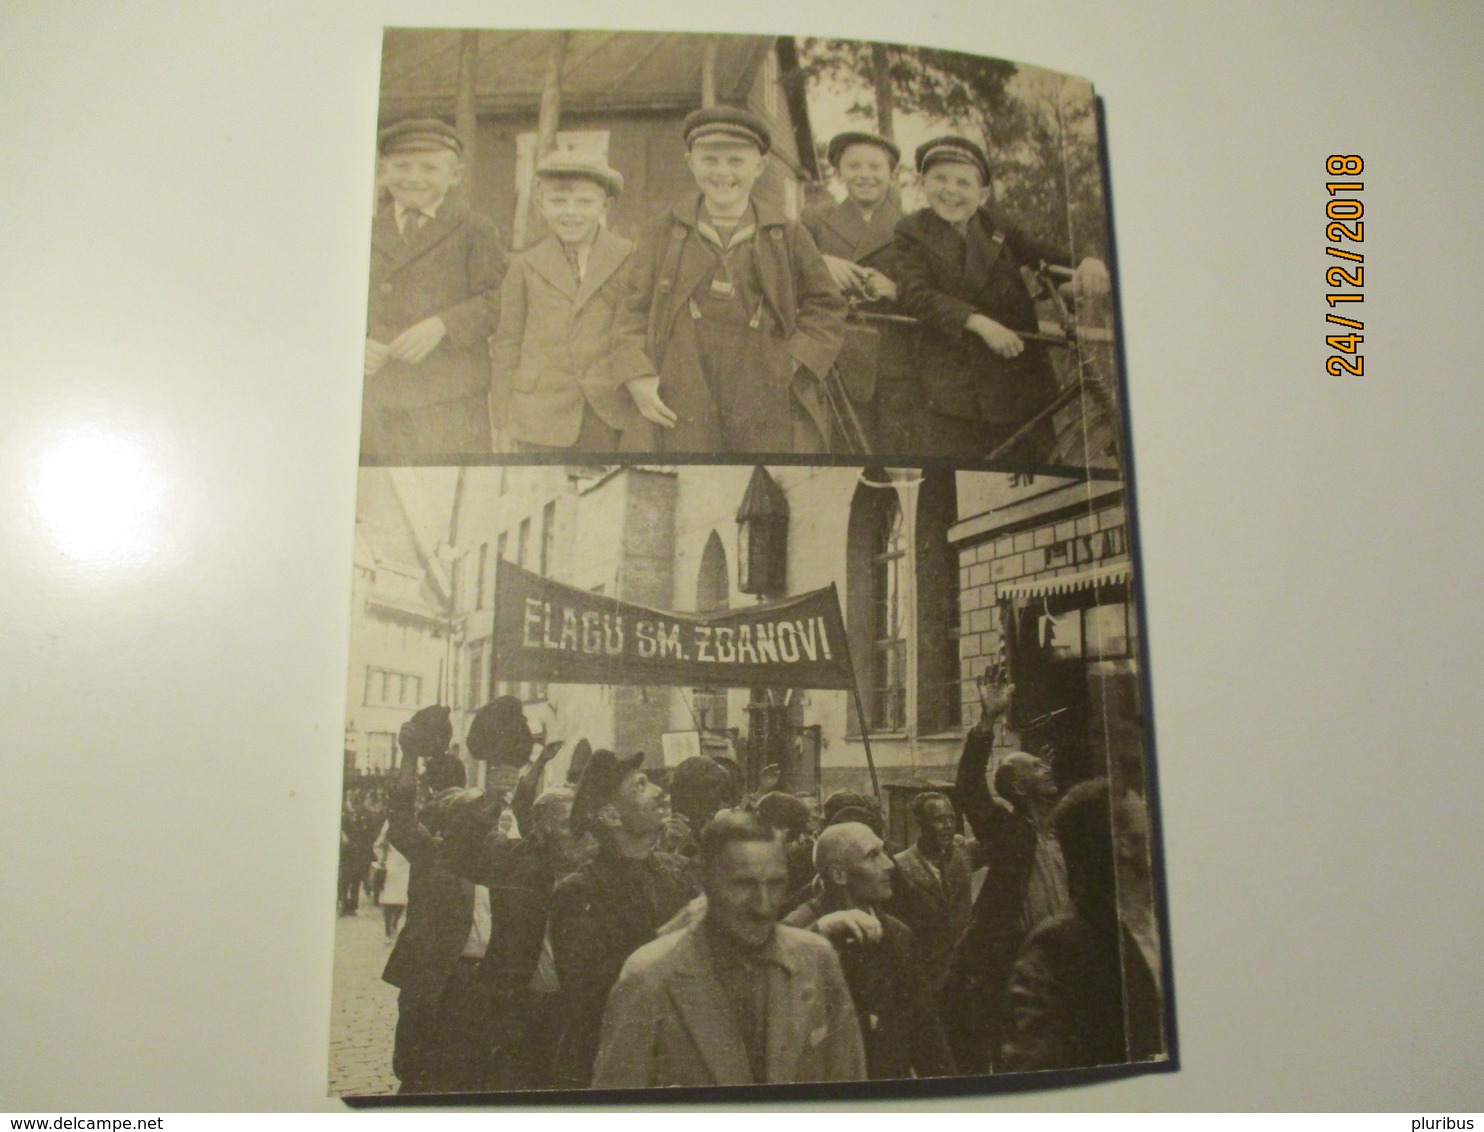 ESTONIA THE YEAR 1940 BEFORE AND AFTER , PHOTO BOOK IN ESTONIAN RUSSIAN AND ENGLISH , 0